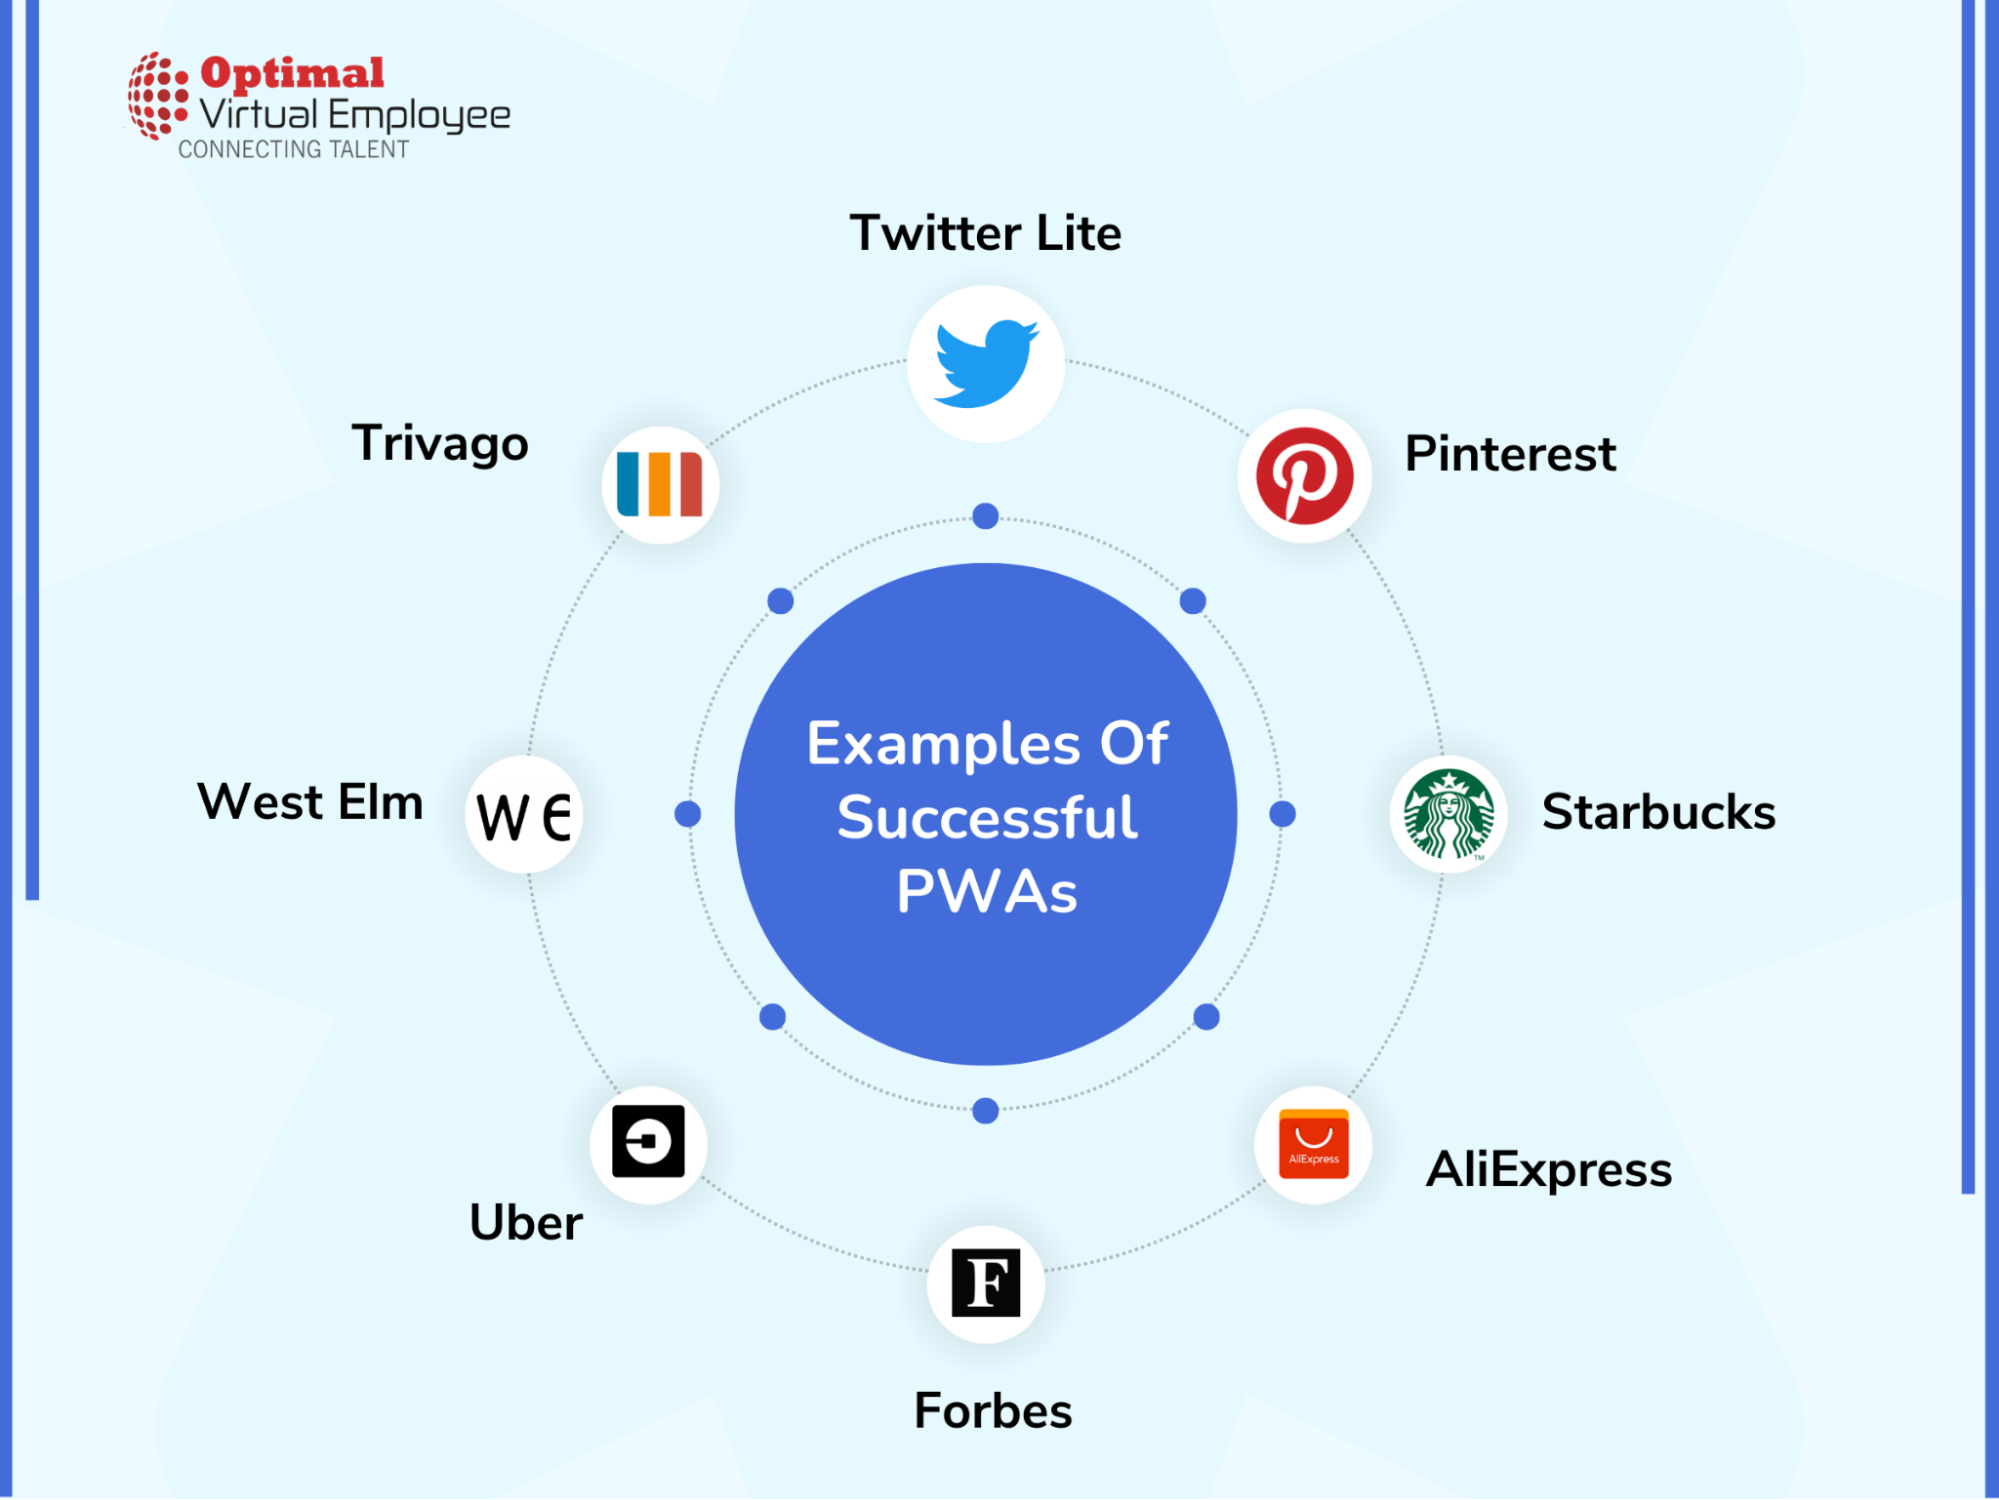 Examples Of Successful PWAs